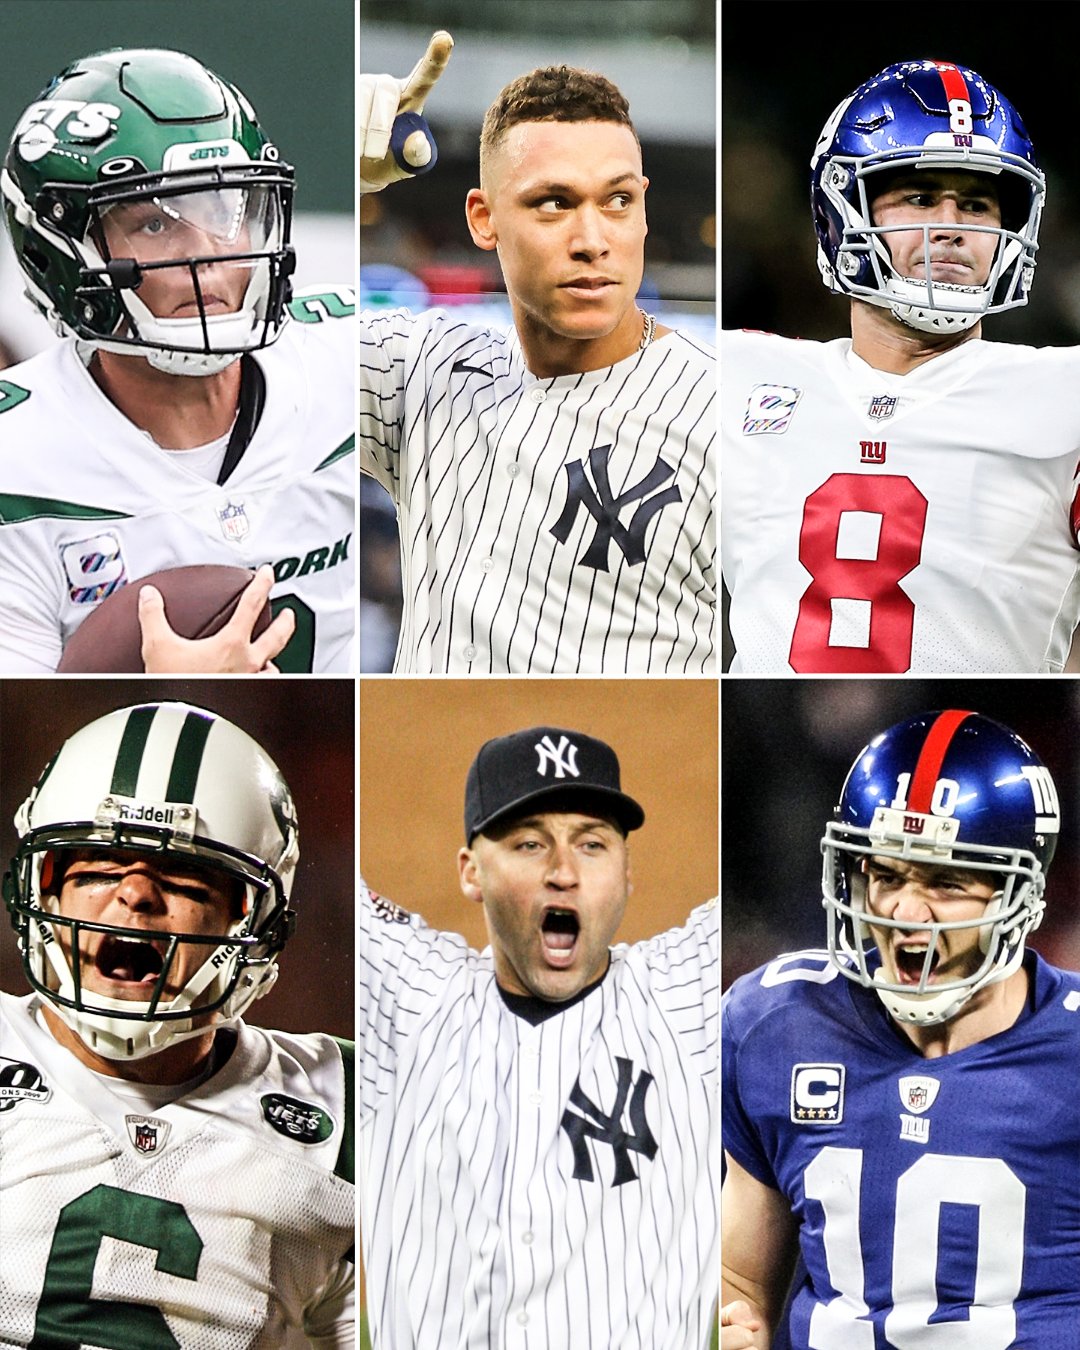 SportsCenter on X: 'The last time the Jets, Yankees and Giants won